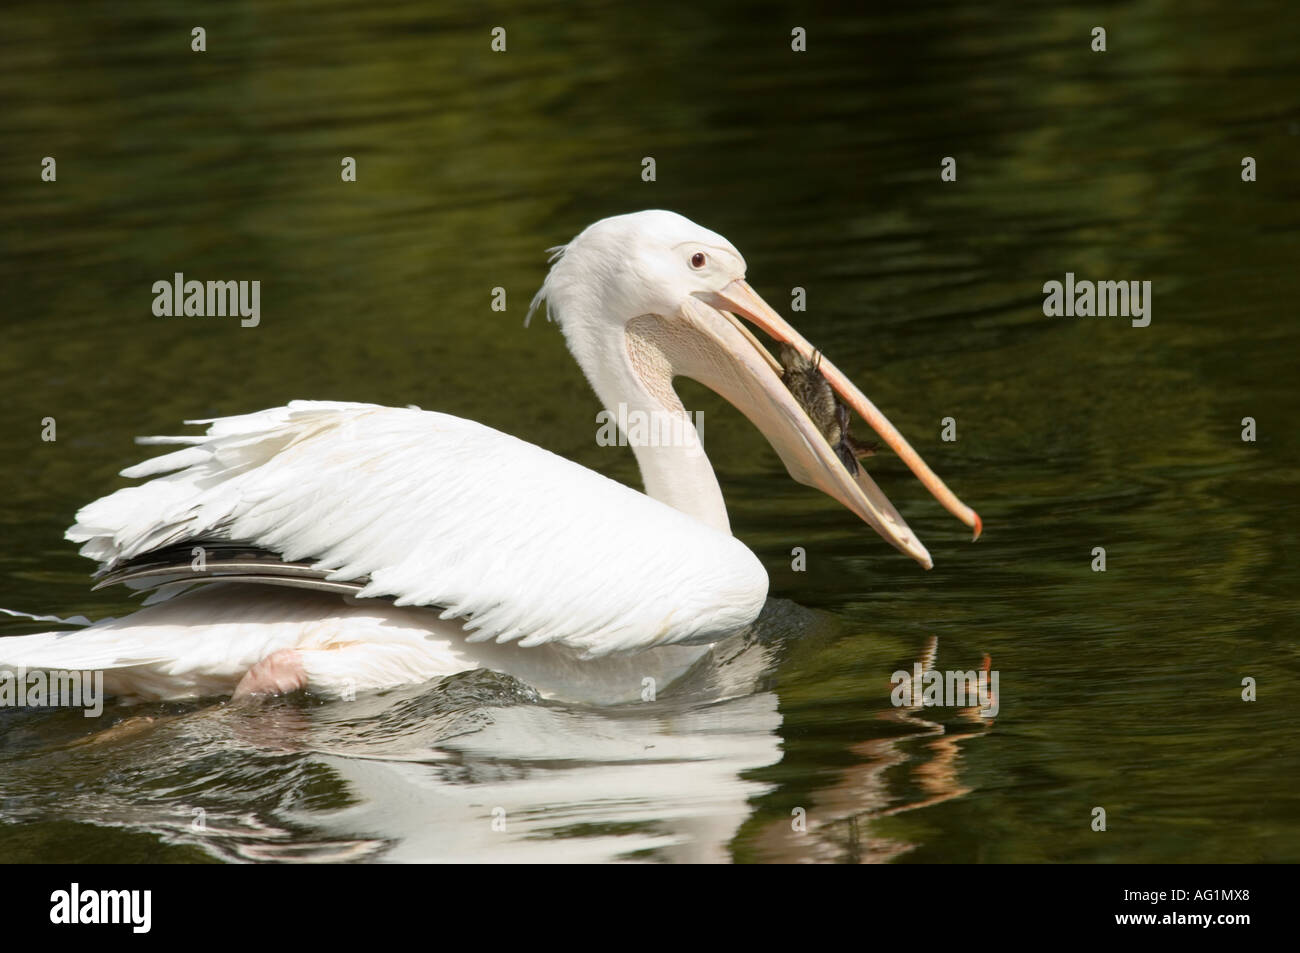 A White Pelican (Pelecanus onocrotalus) aka Eastern White or Great White has just captured a duckling in it's mouth. Stock Photo